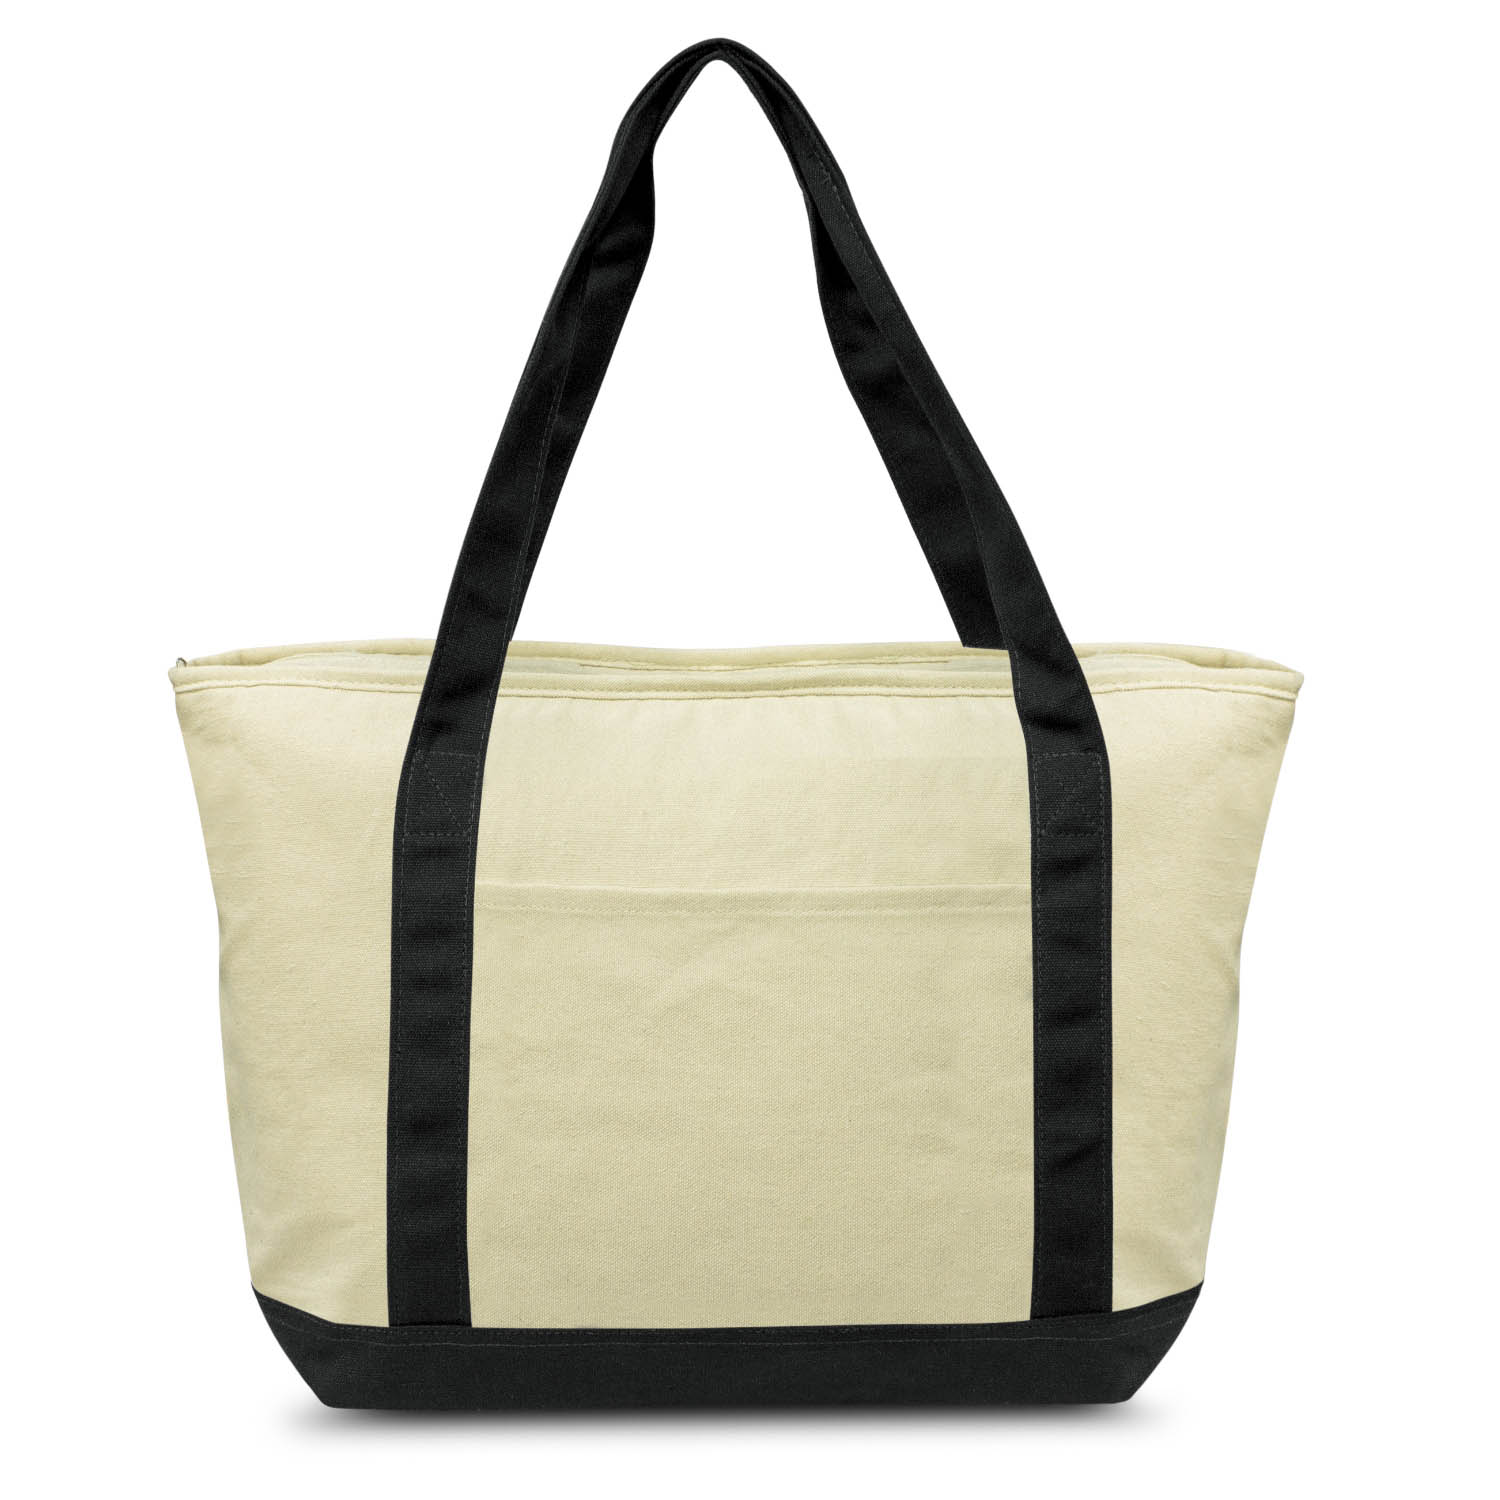 Custom Made Calico Cooler Bags in Perth Australia - Mad Dog Promotions